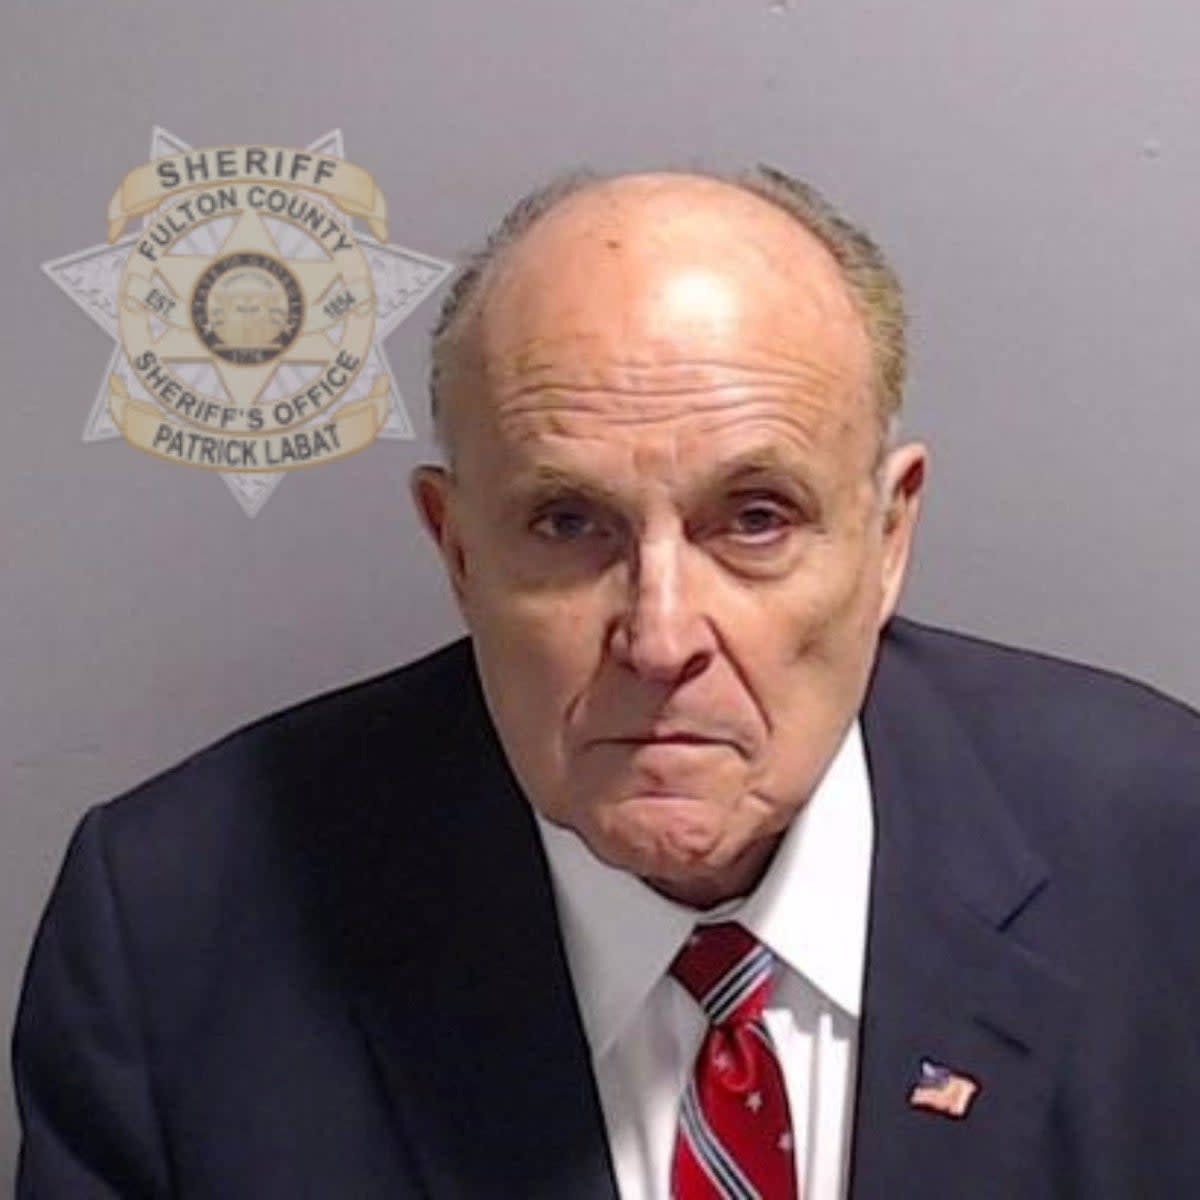 Giuliani is shown in a police booking mugshot released by the Fulton County Sheriff's Office (via REUTERS)